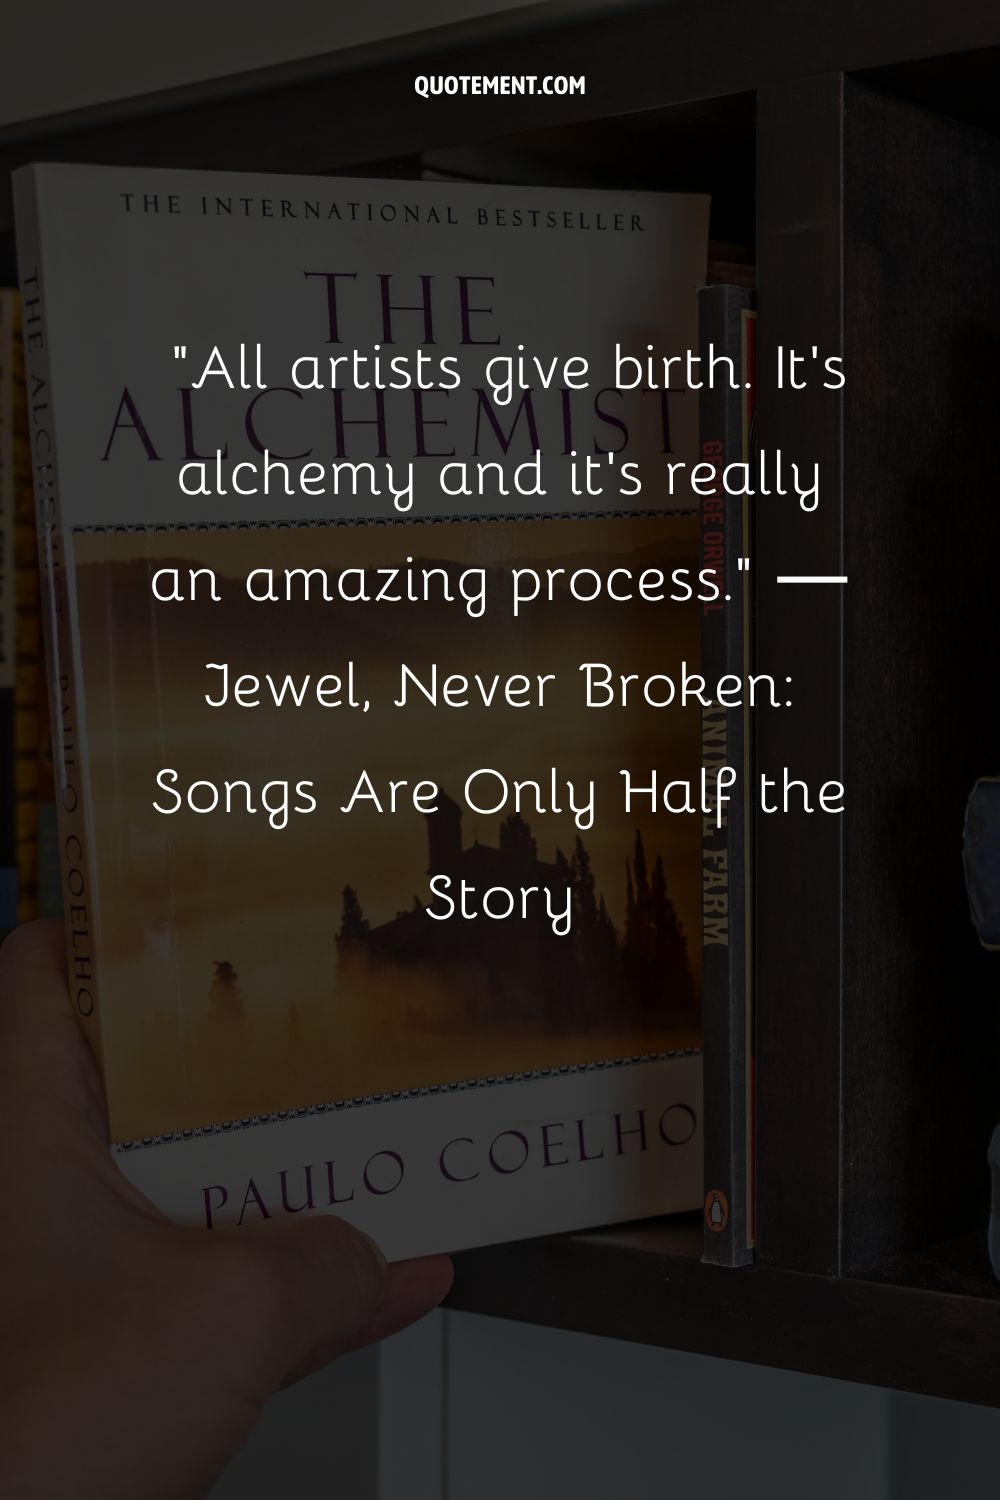 All artists give birth. It's alchemy and it's really an amazing process